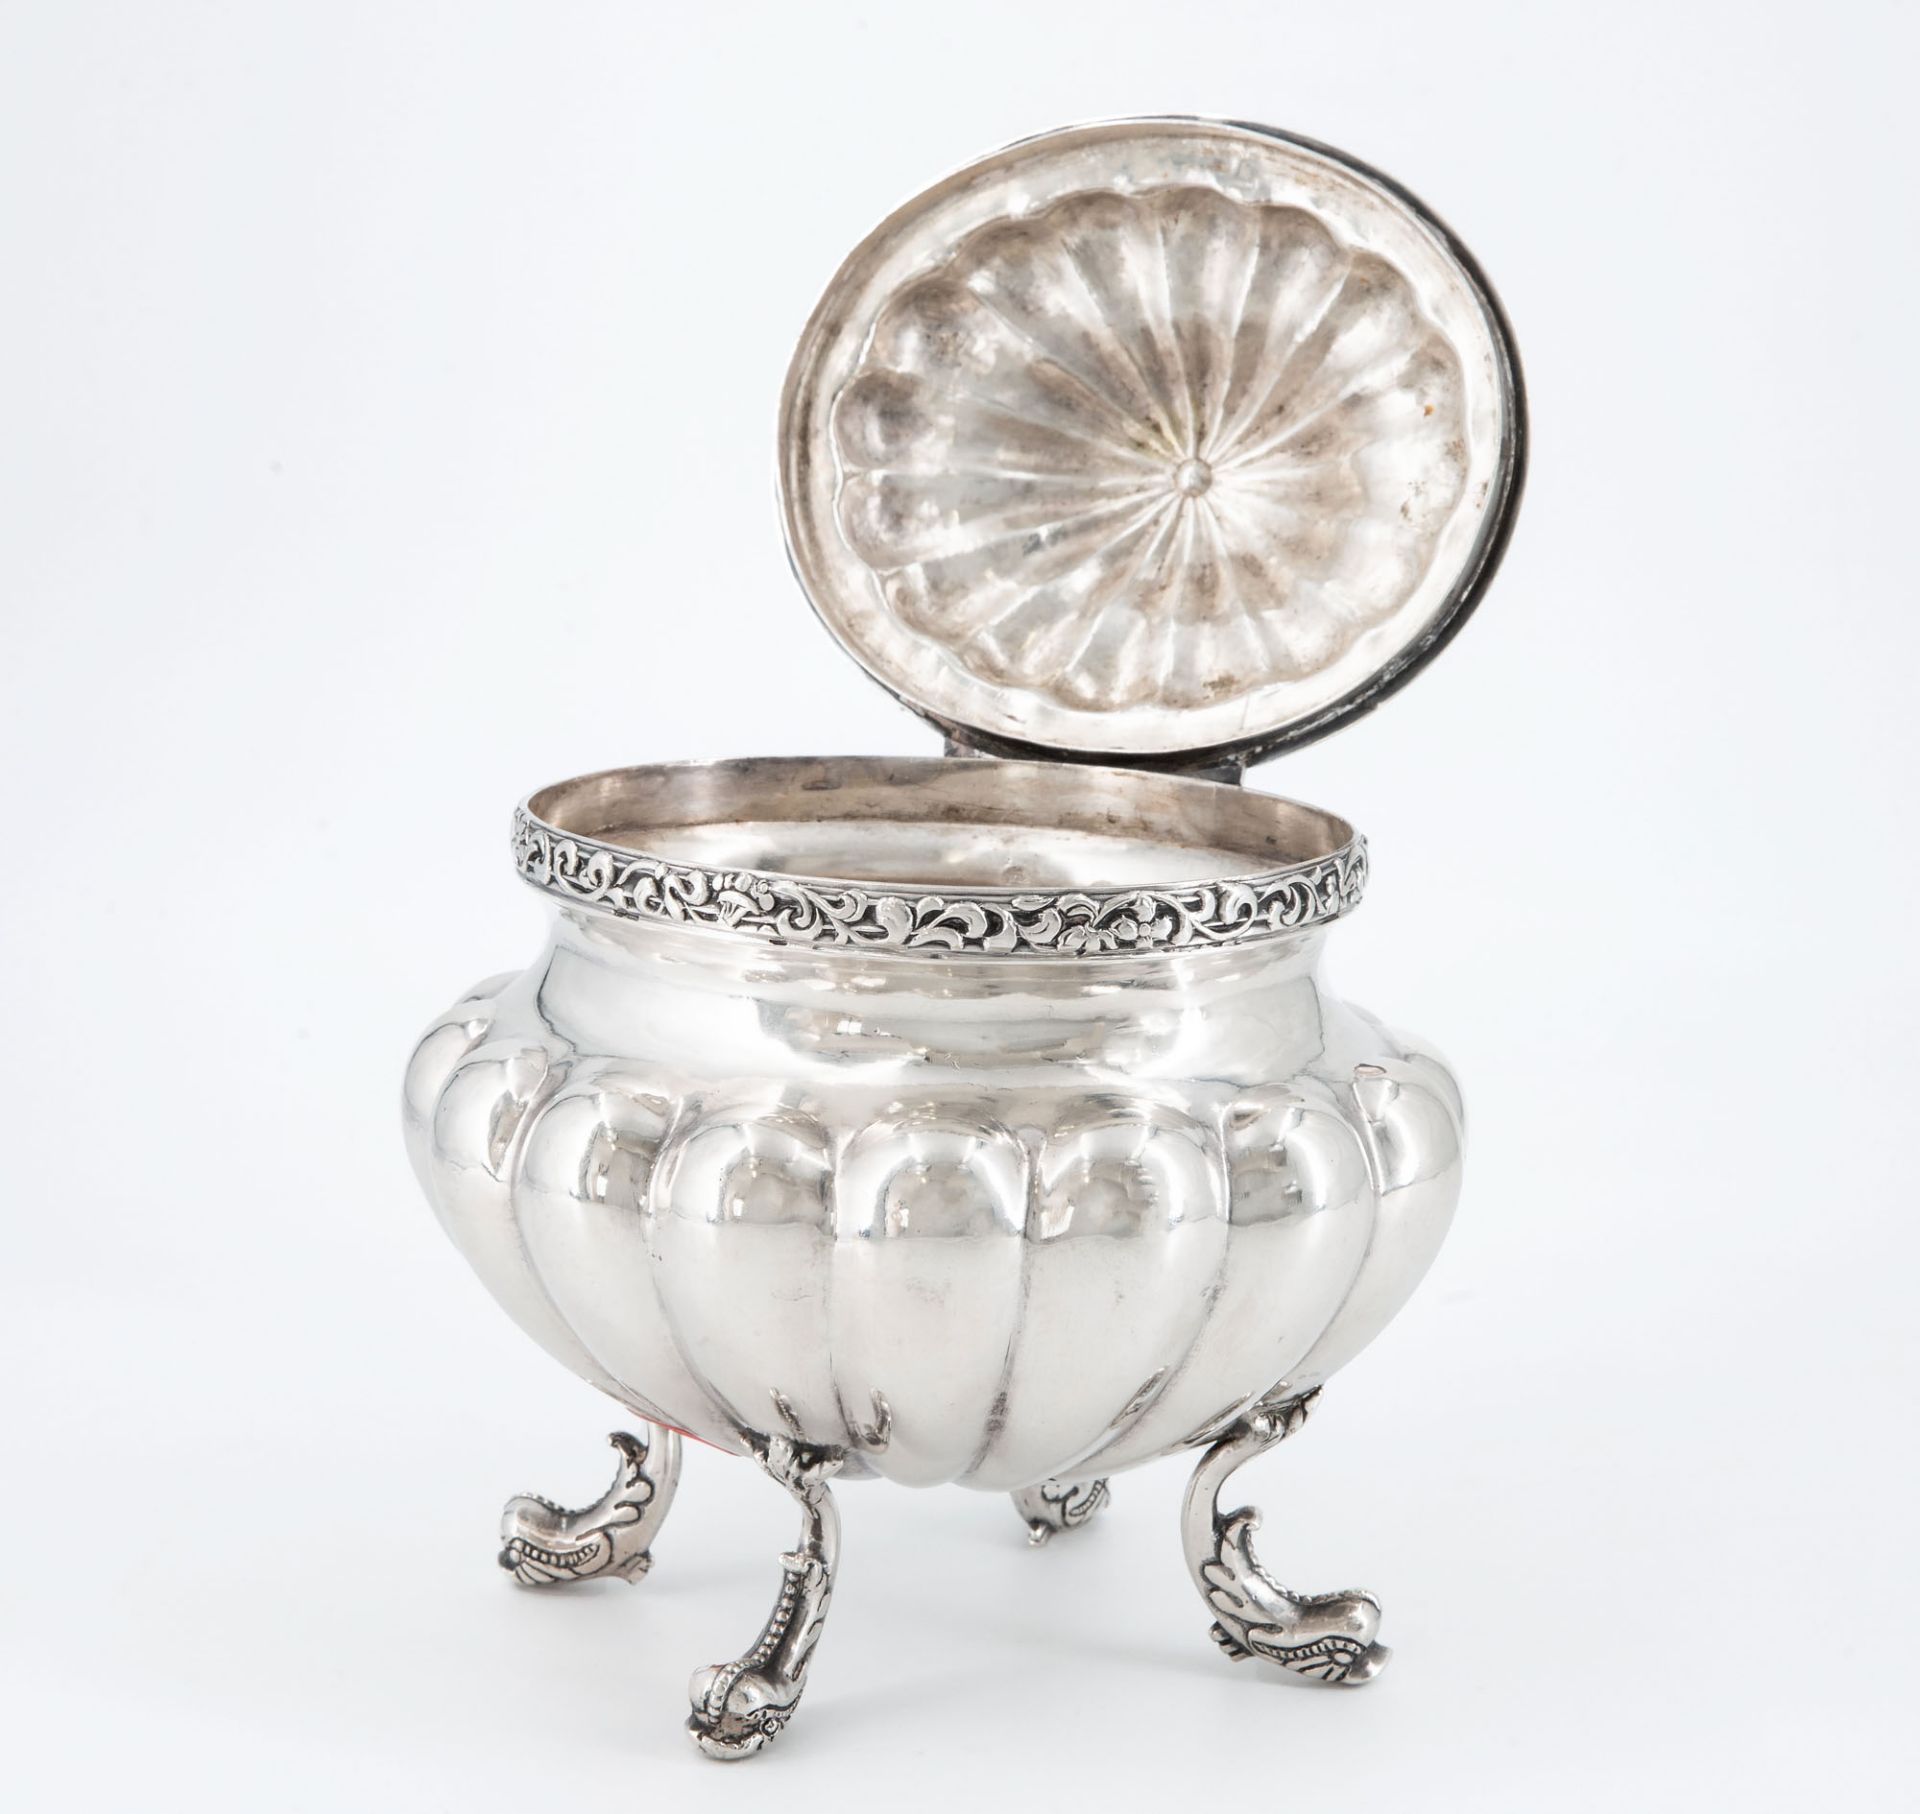 A Fine Silver Etrog Container, Austro-Hungary Early 19th Century - Image 3 of 4